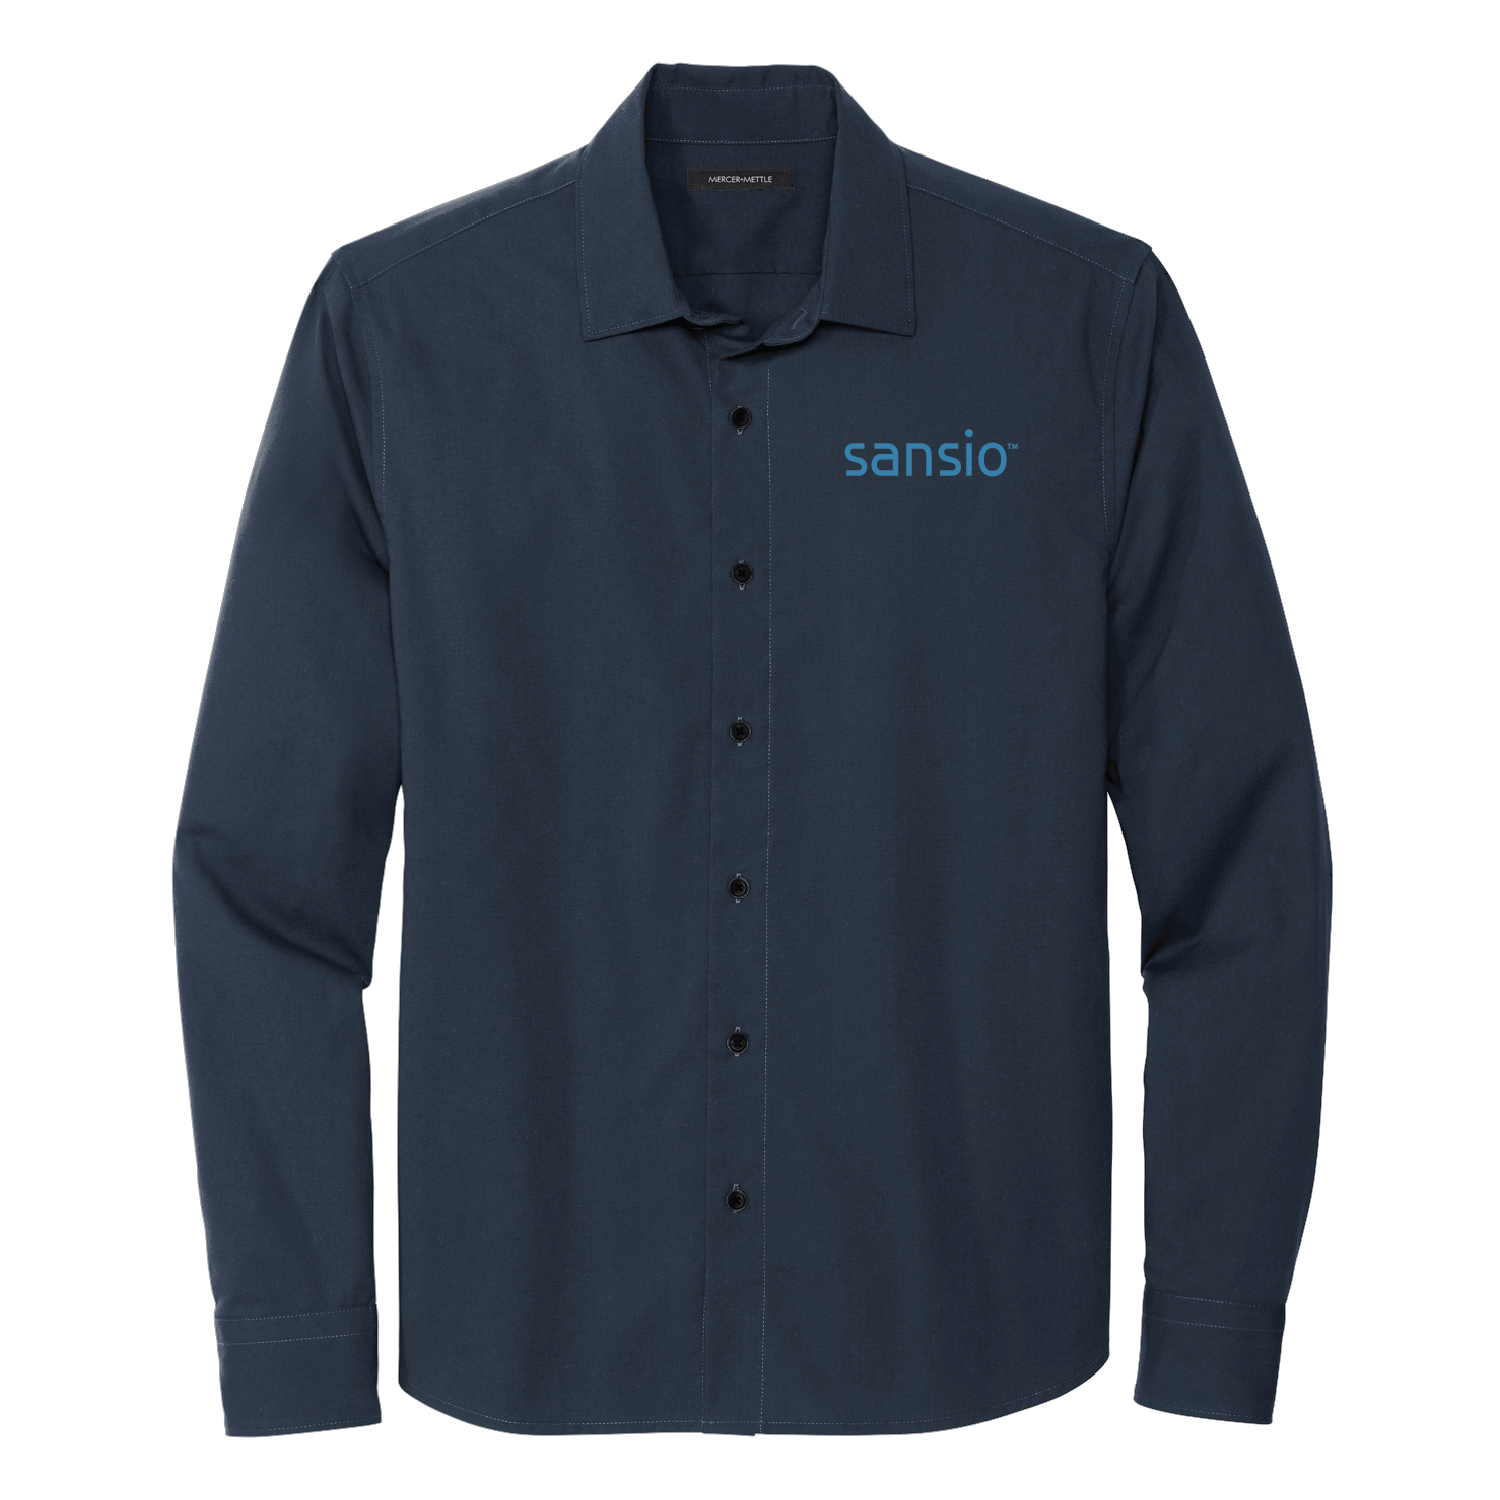 Sansio Long Sleeve Stretch Woven Shirt - DSP On Demand